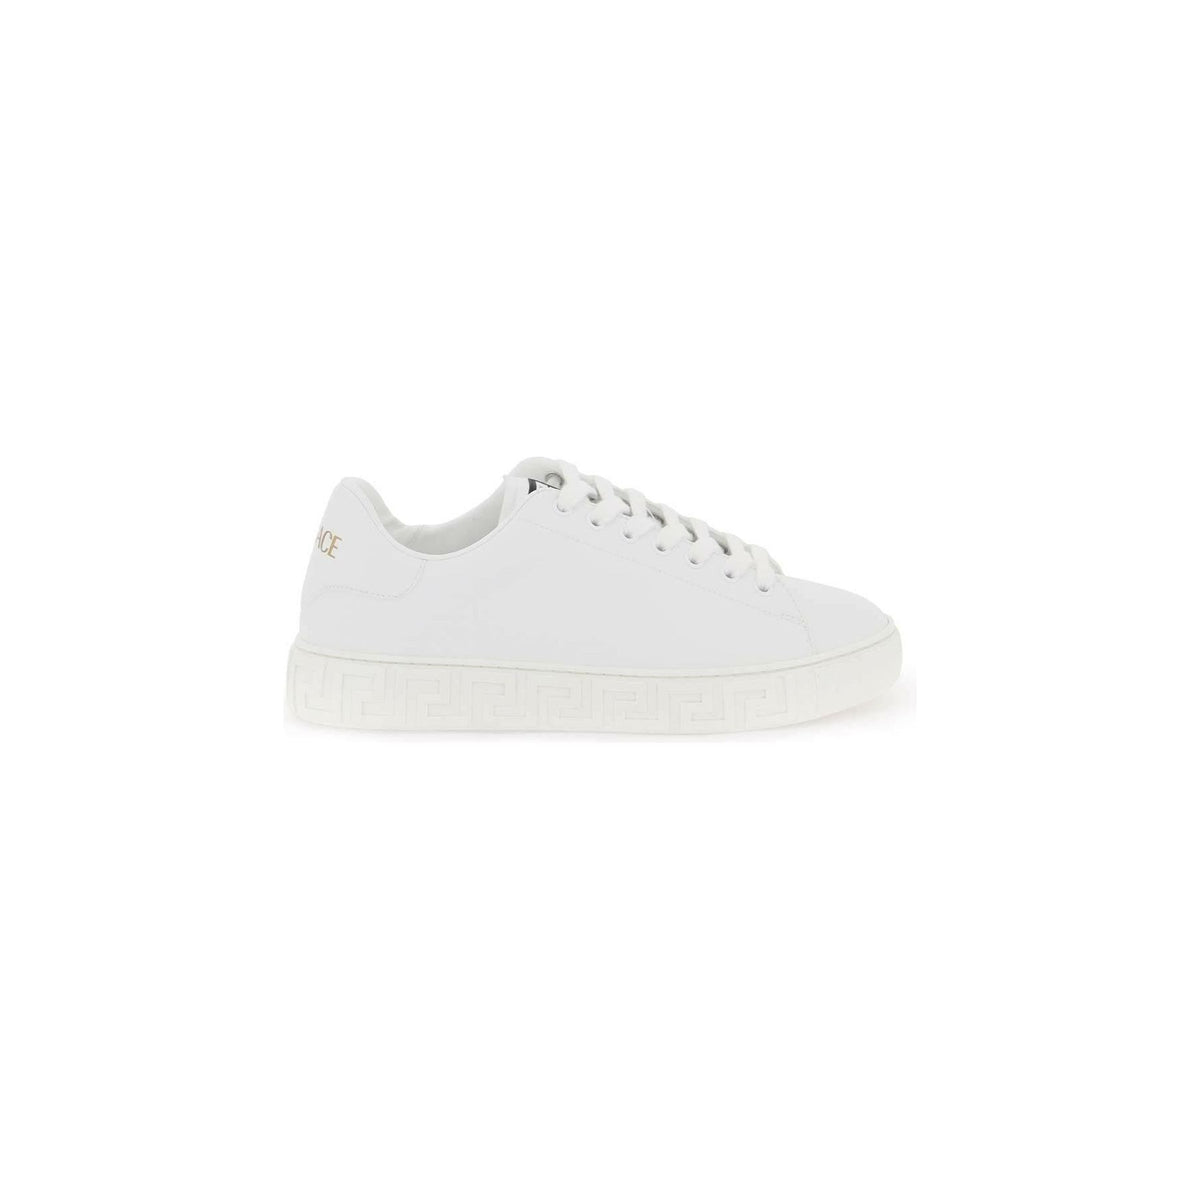 White Faux Leather Greca Sneakers With Embossed Motif VERSACE JOHN JULIA.